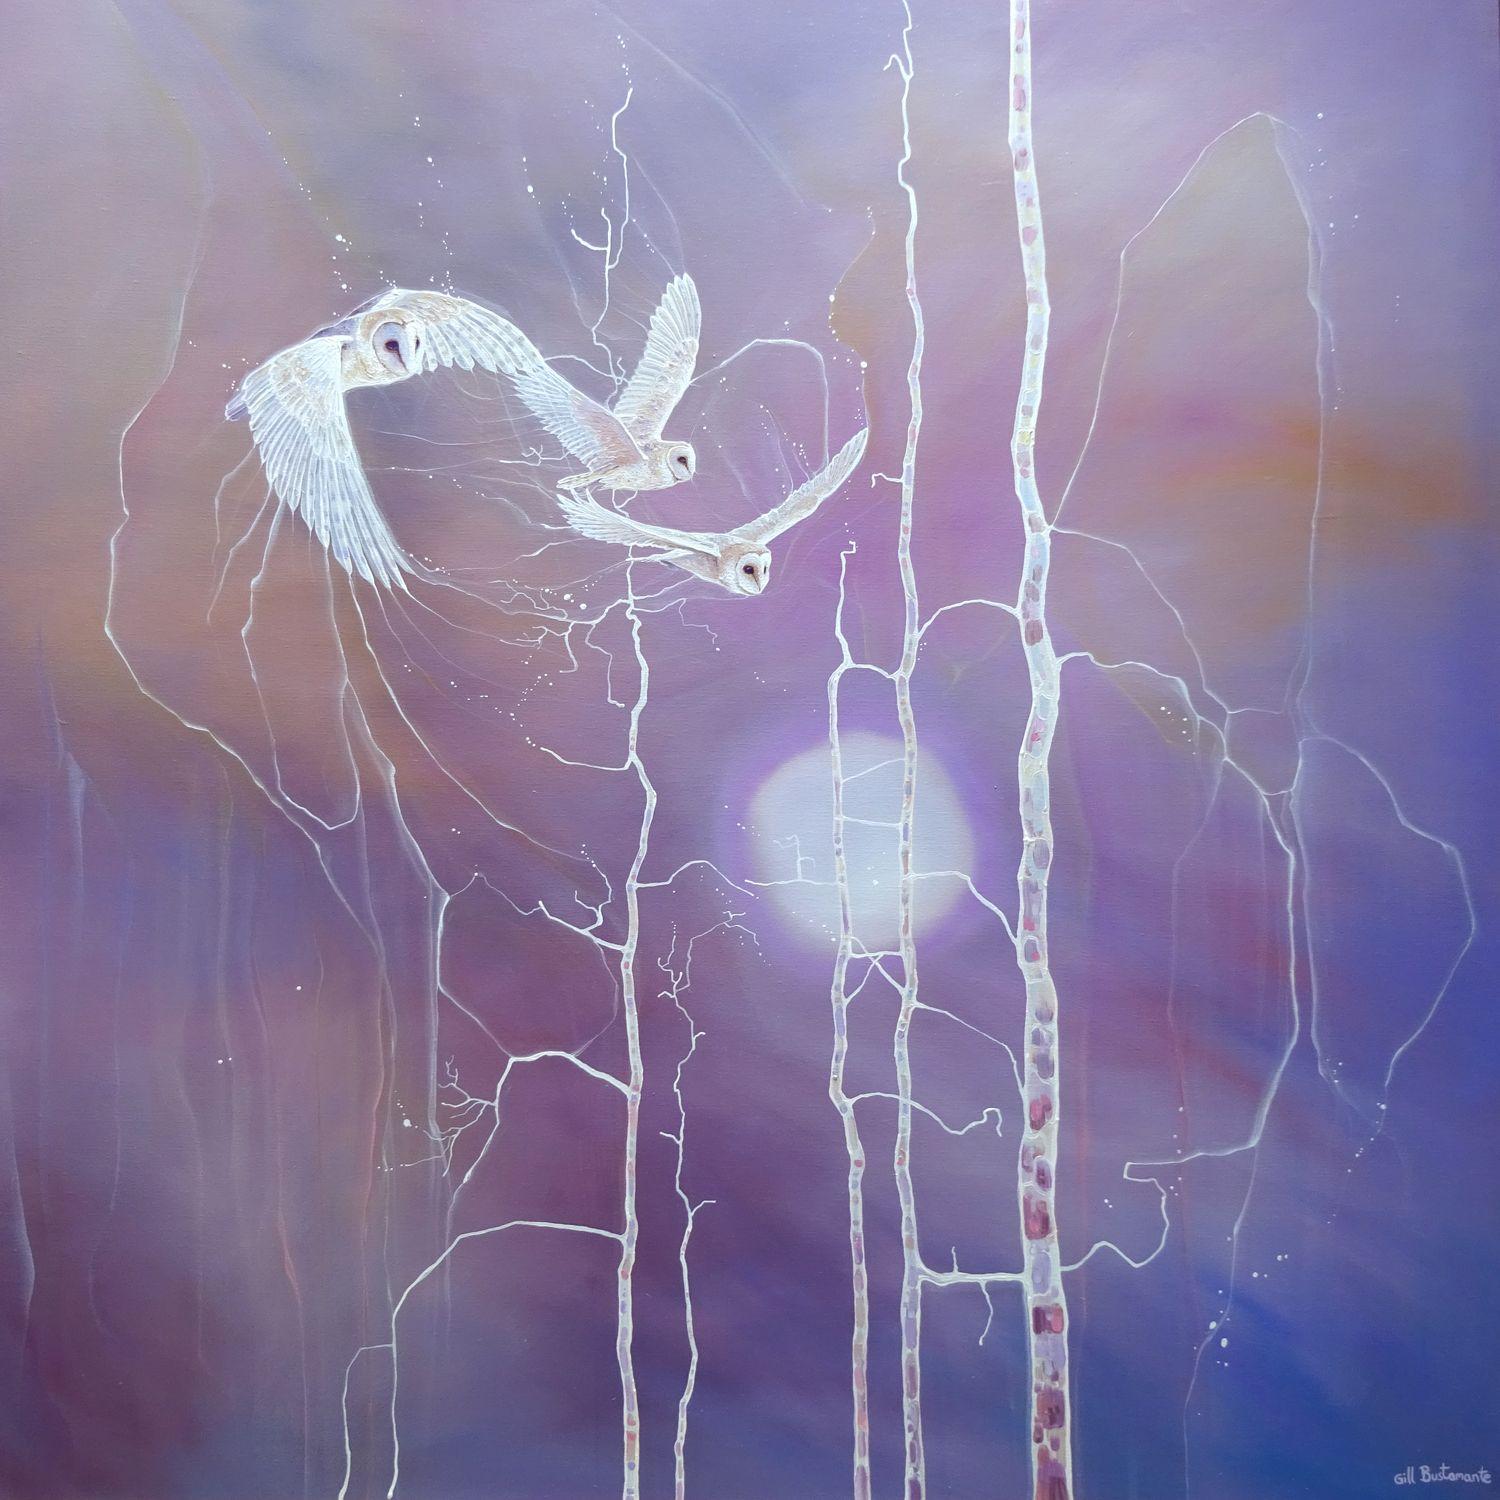 Night Magicians is a large oil painting on canvas of three white barn owls flying across a lilac and orange twilight sky. It is contemporary art nouveau in style which you can see from the stylised shapes of the twigs and branches of the delicate